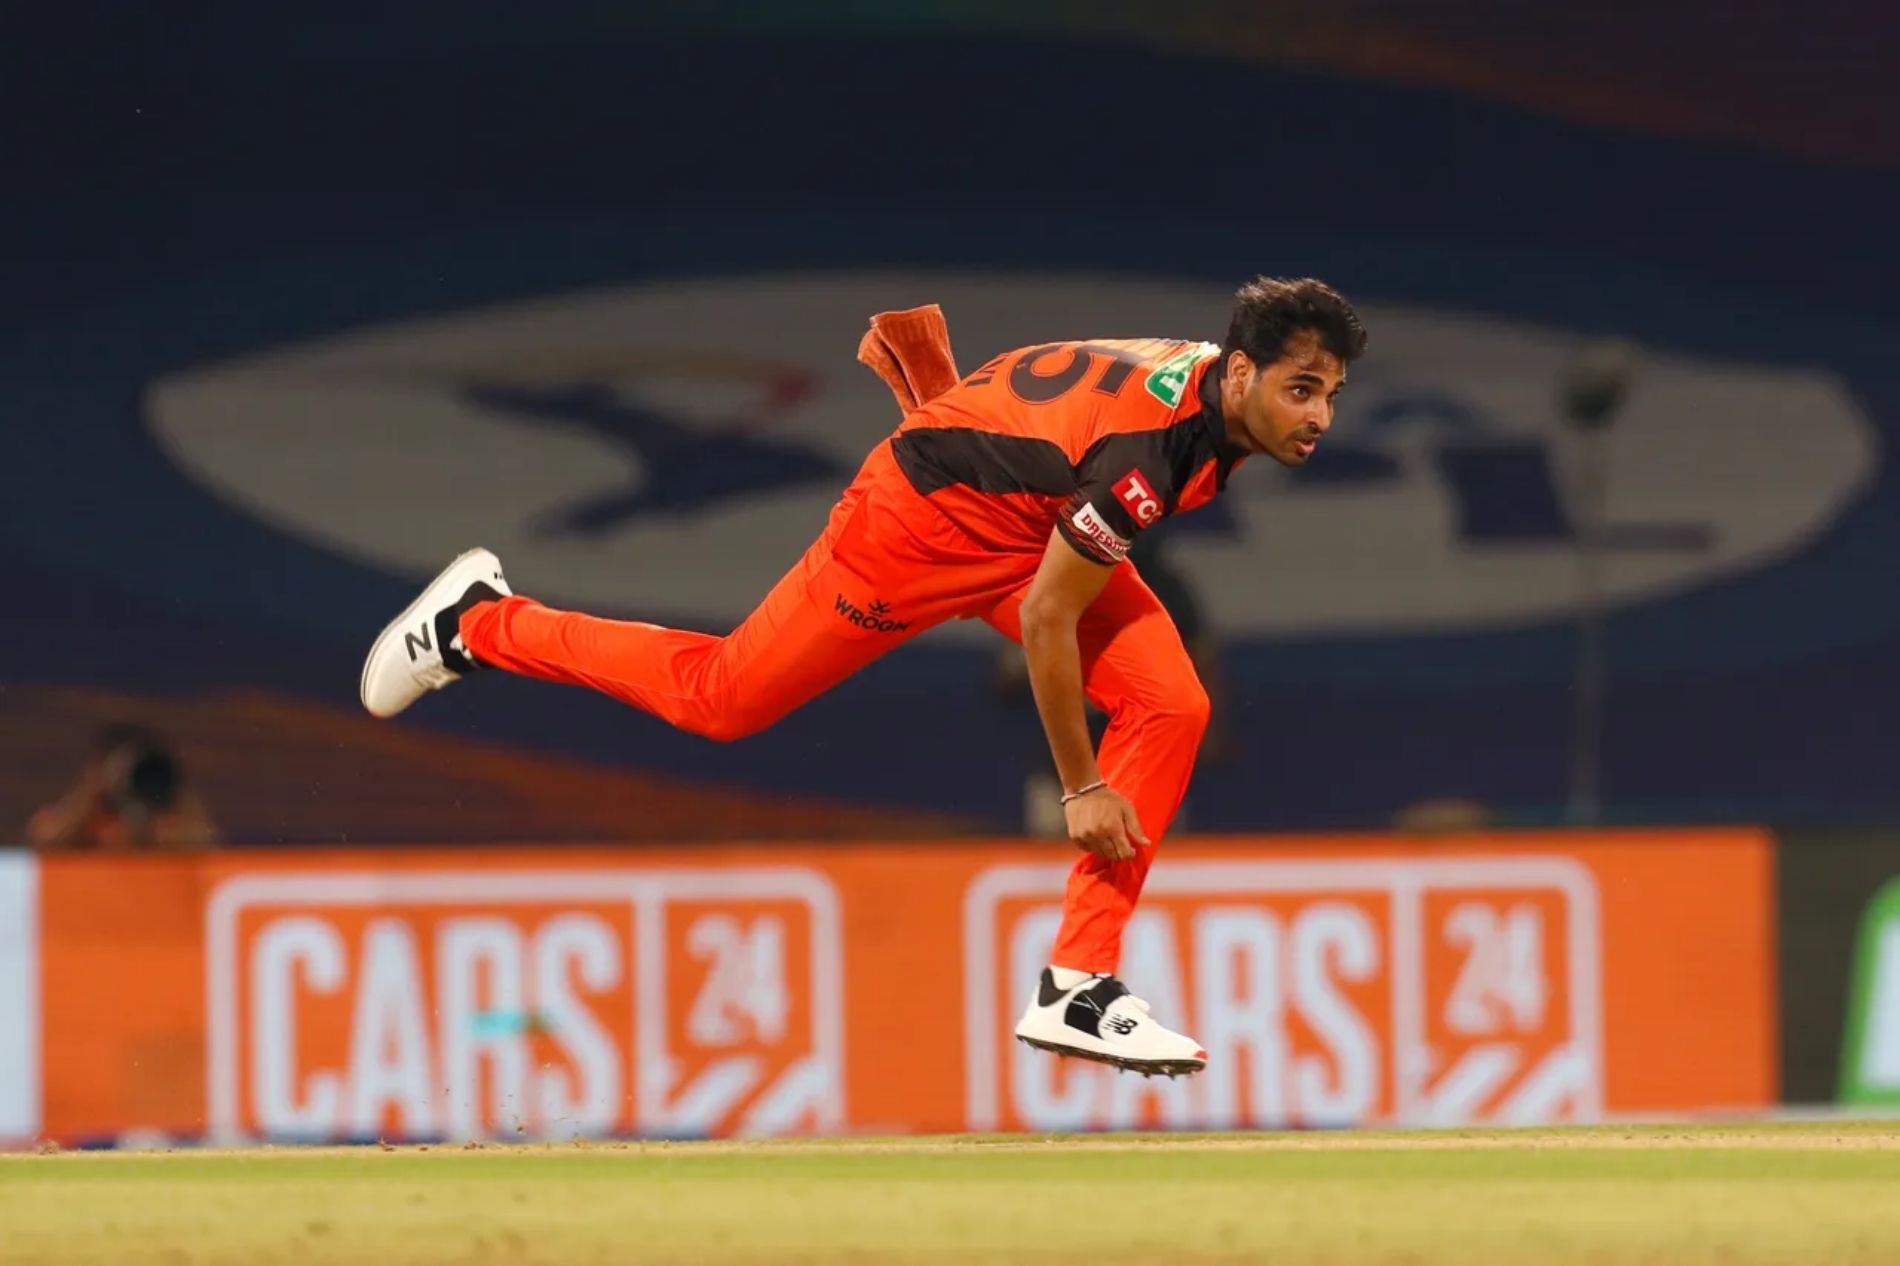 Bhuvneshwar Kumar has consistently produced economical spells this year